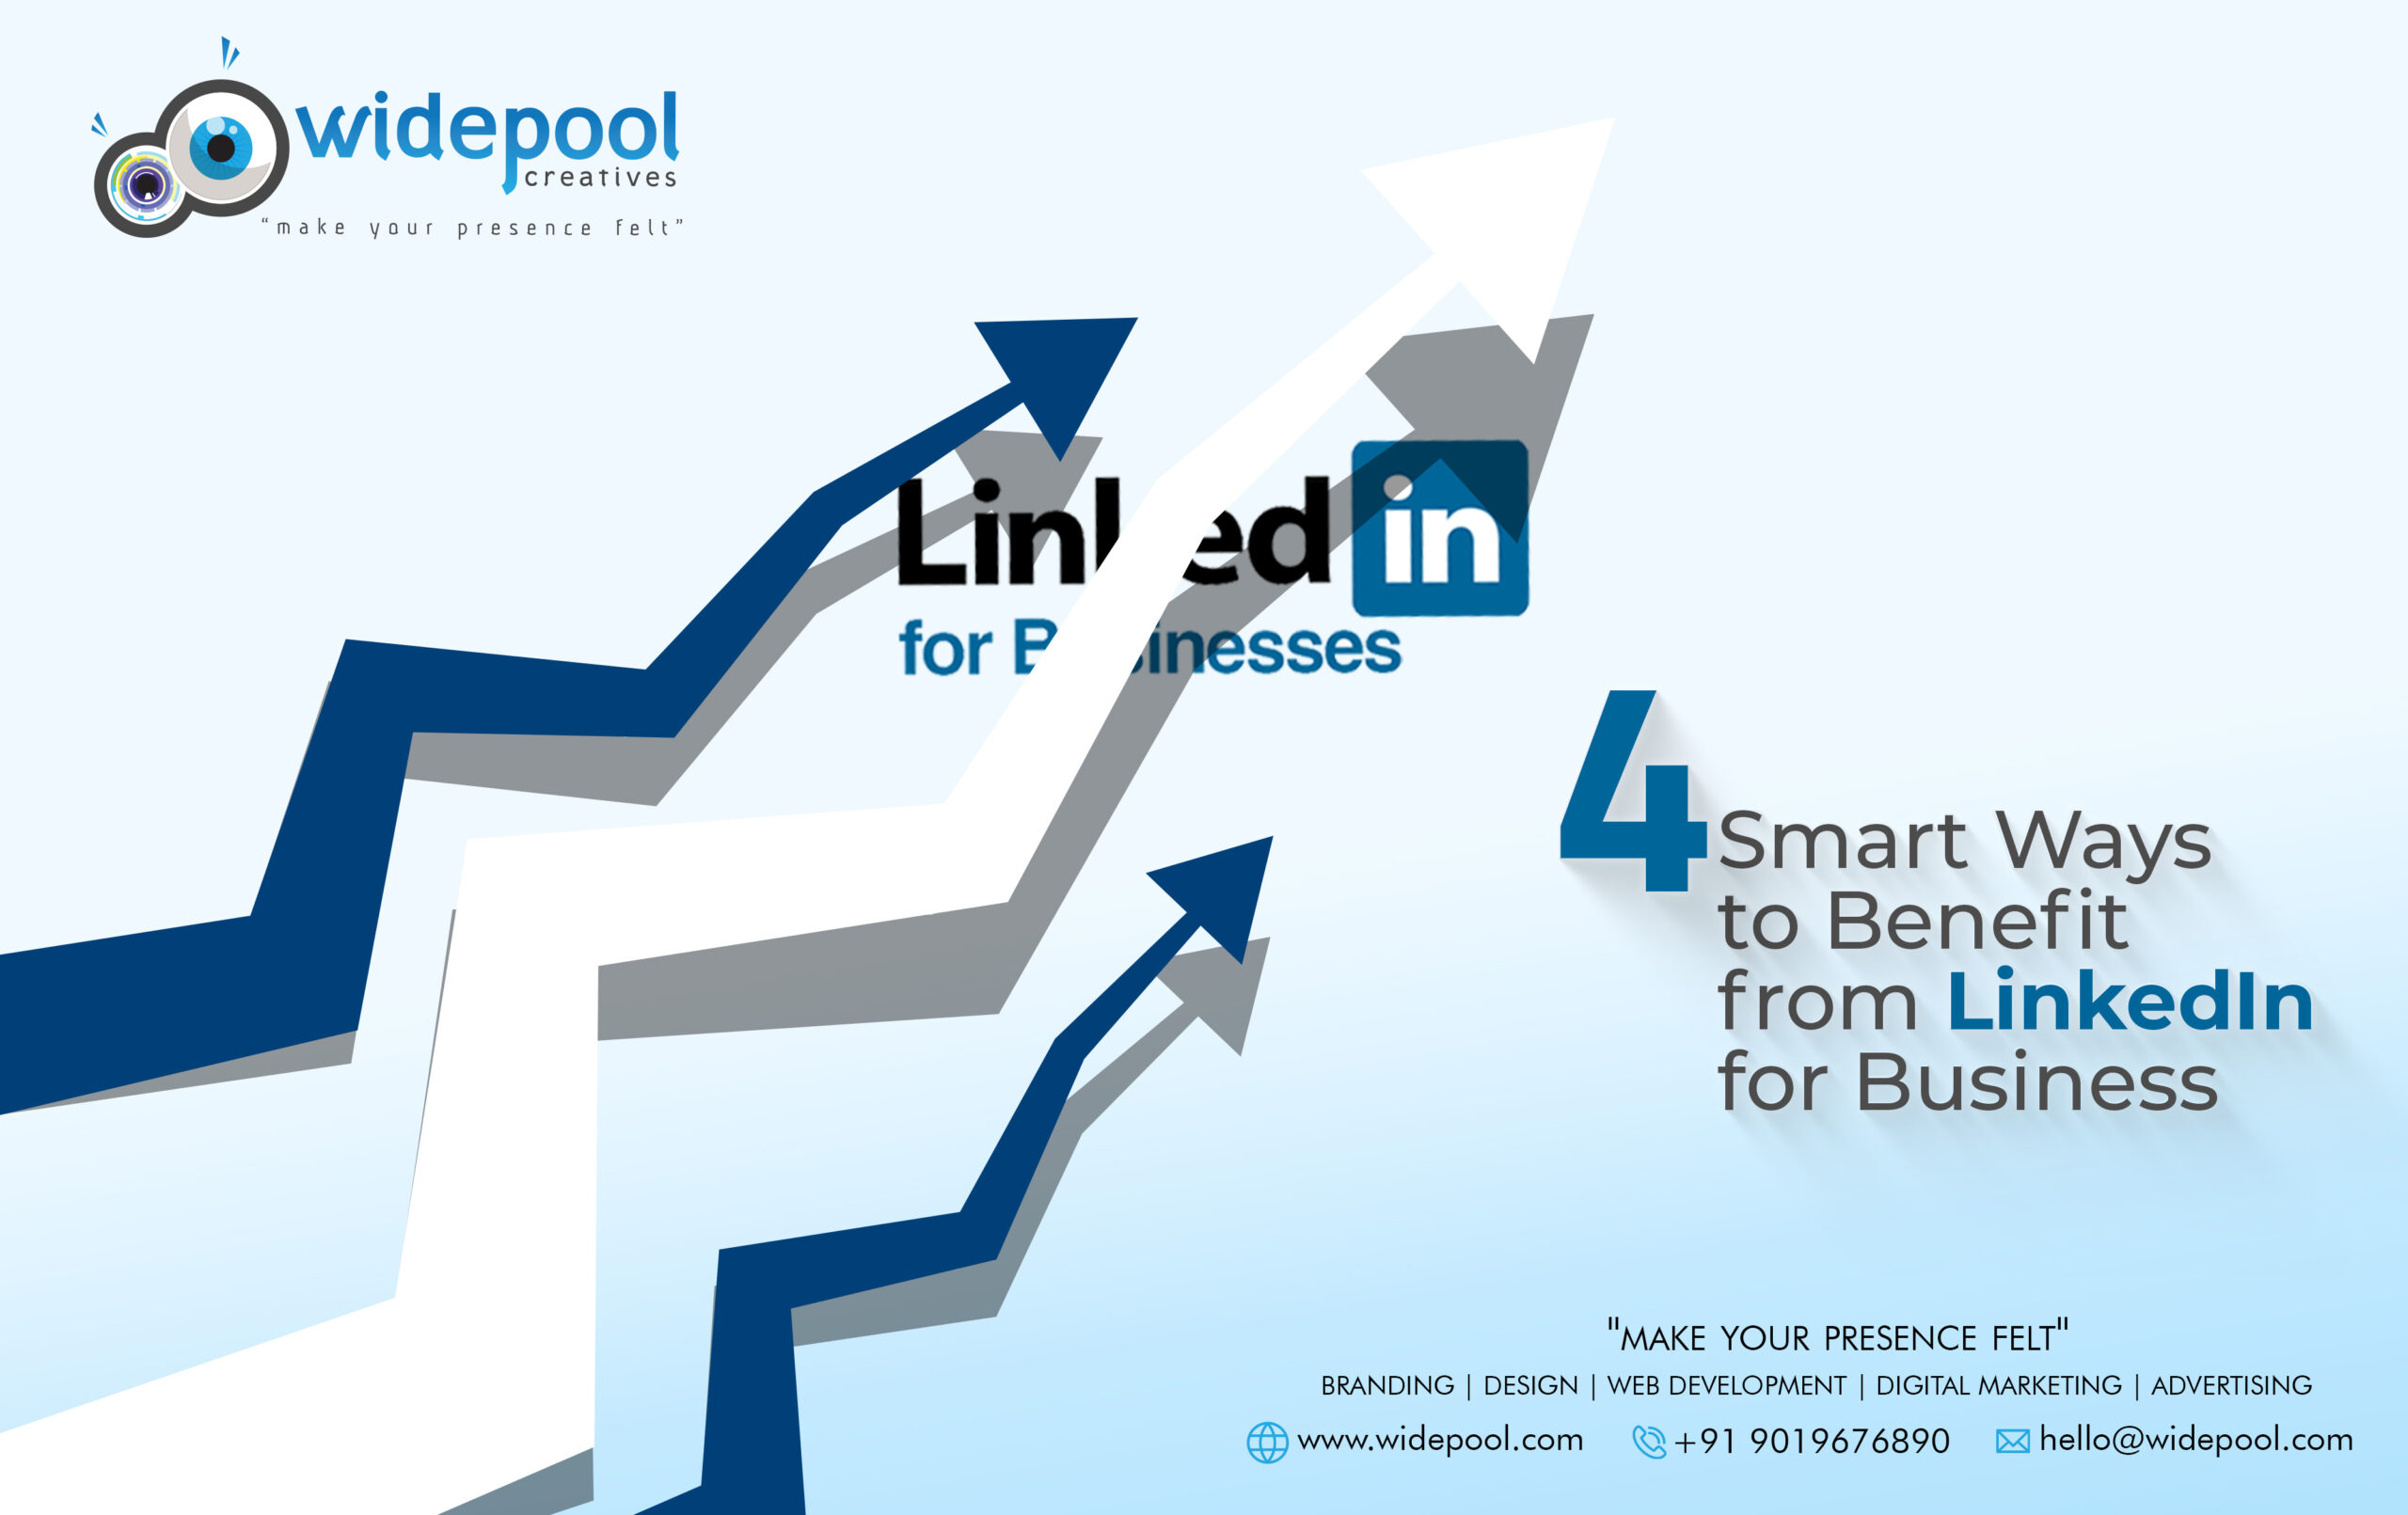 4 Smart Ways to Benefit from LinkedIn for Business